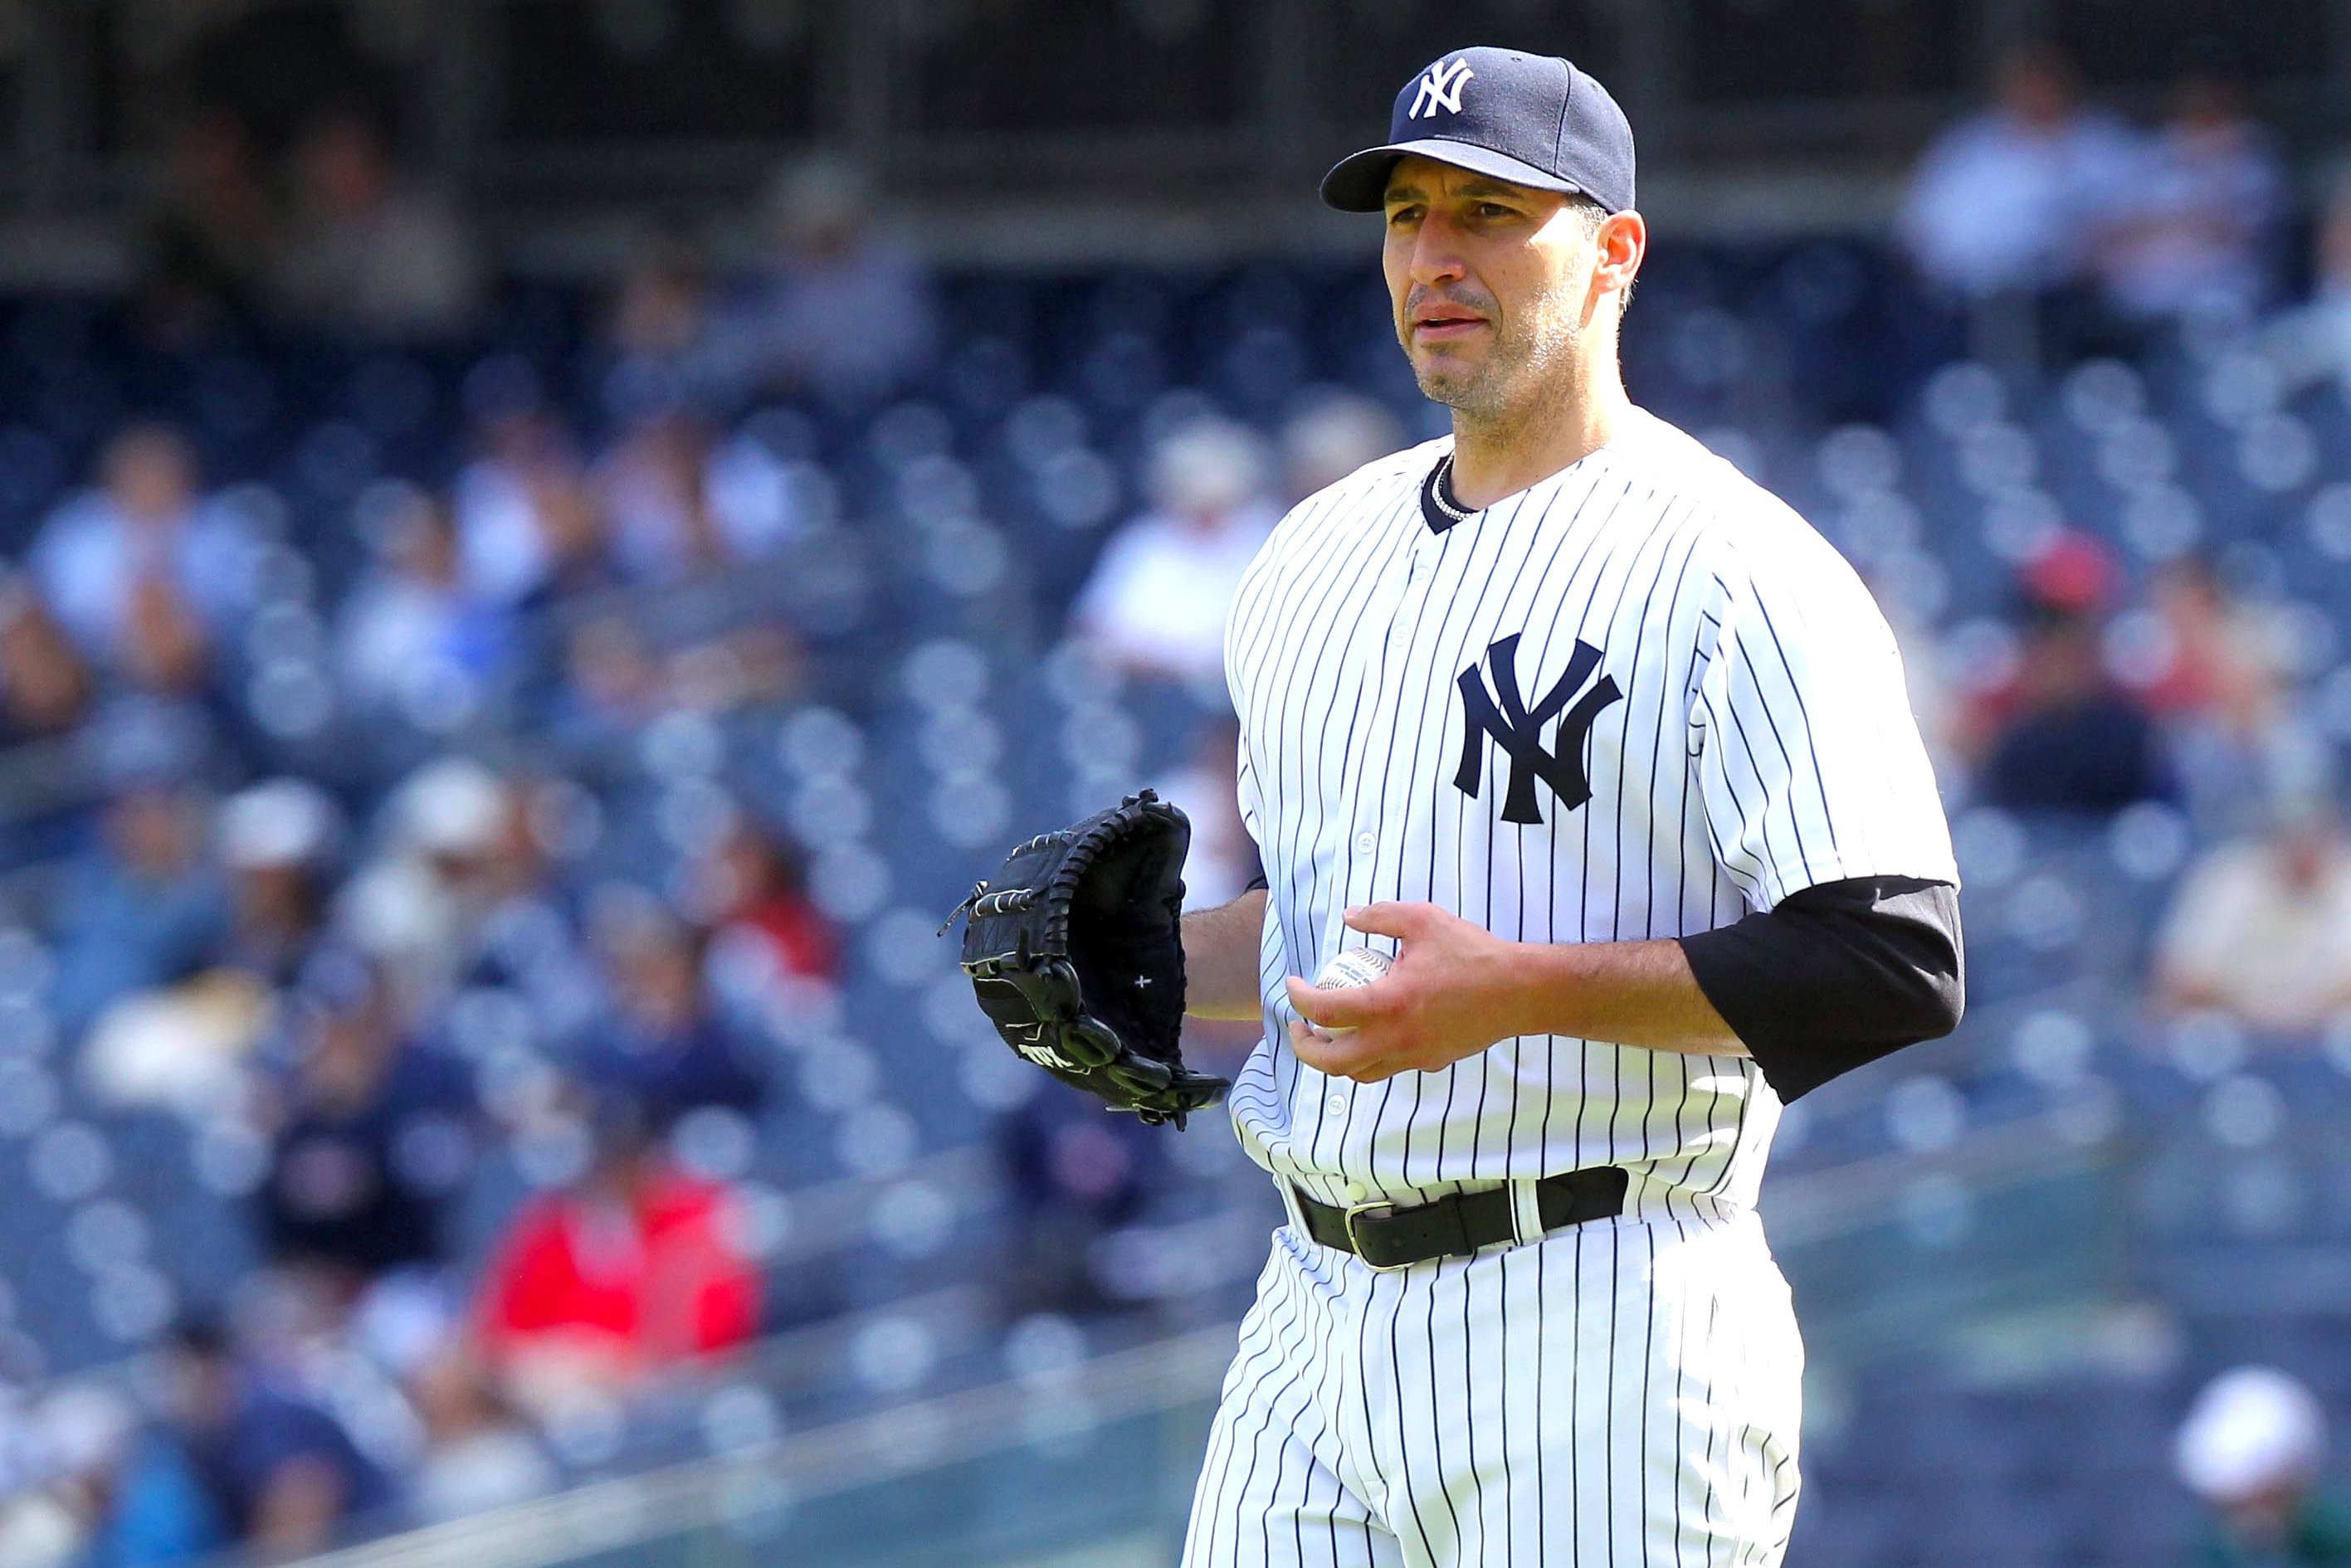 Andy Pettitte finally gets his WBC coaching moment